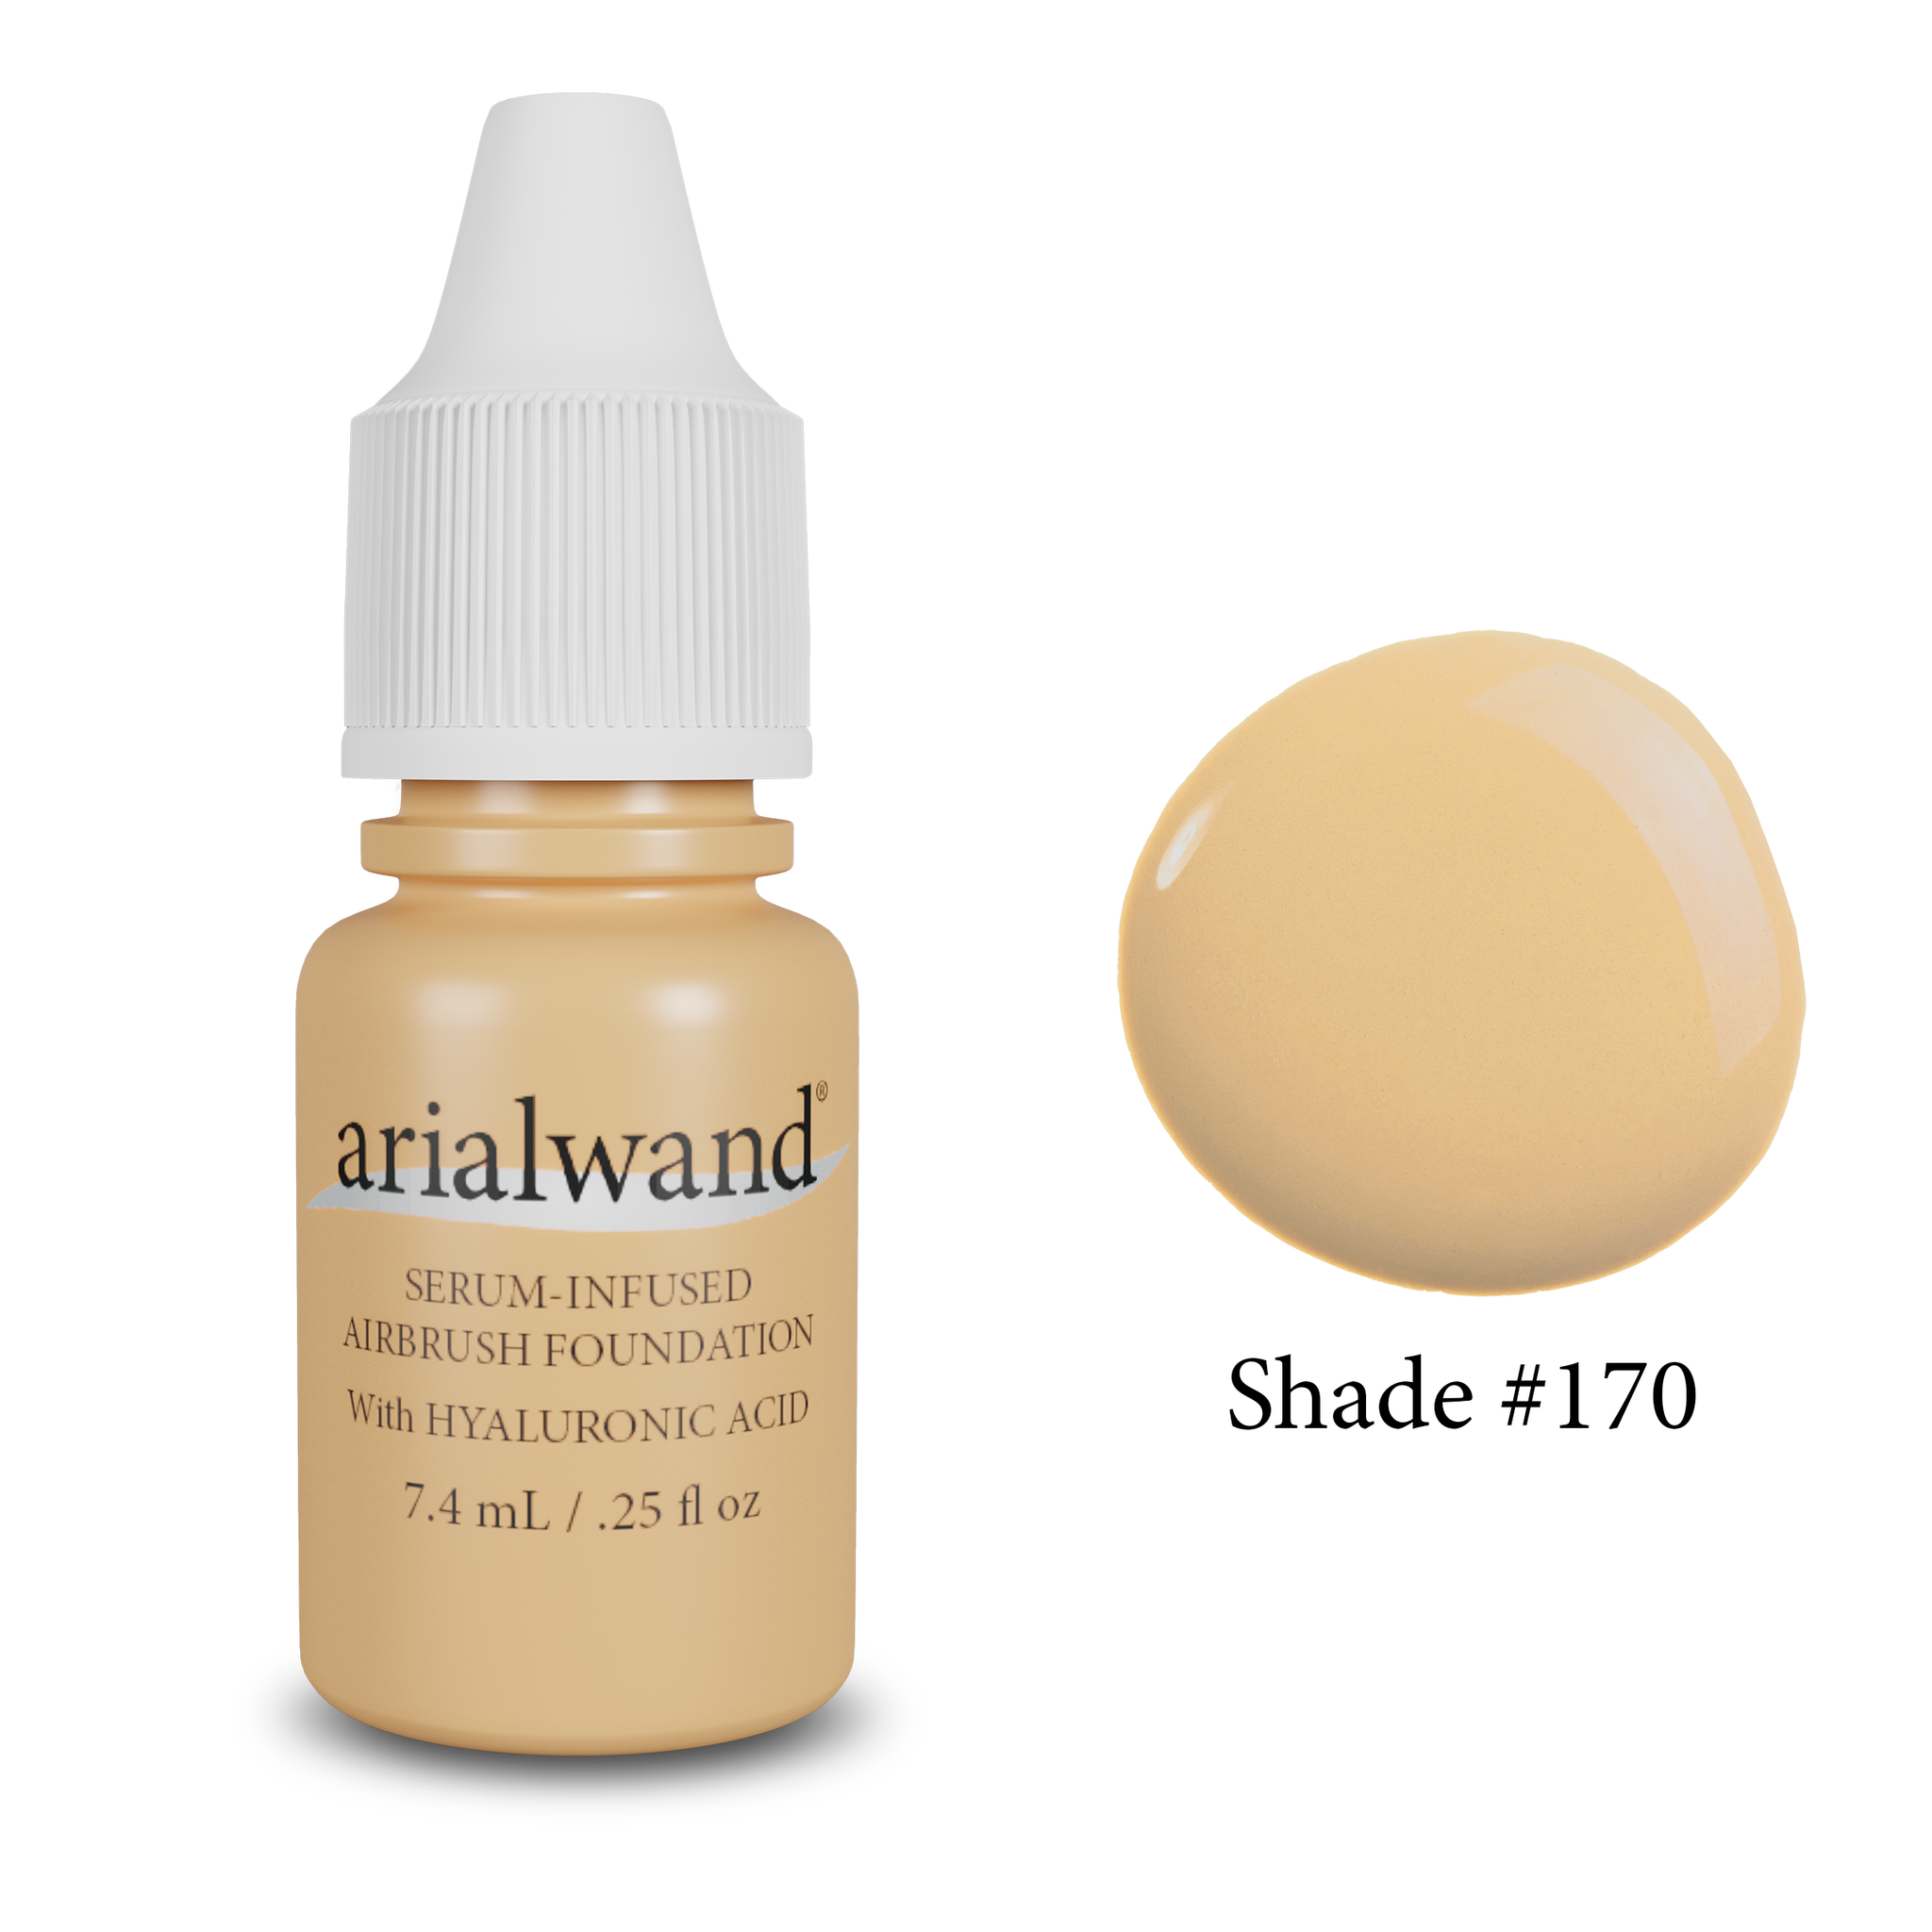 Shade 170, Airbrush Foundation with Hyaluronic Acid